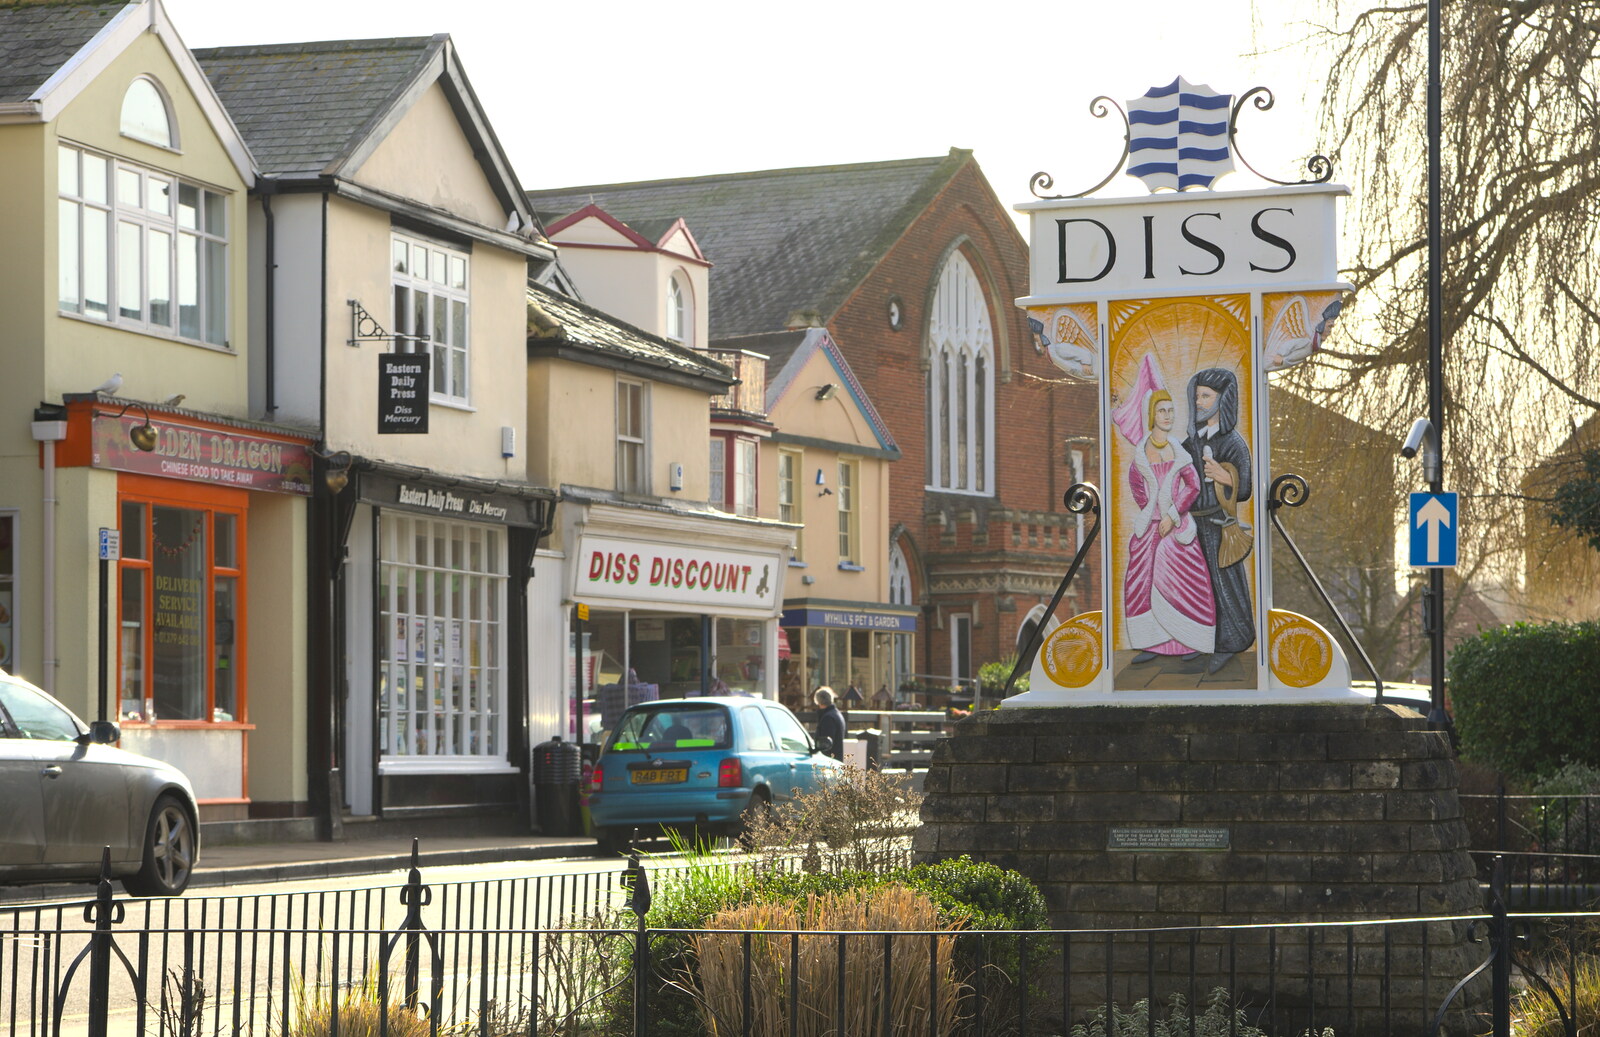 The Diss town sign from A Night at the Bank, and a Building Update, Brome and Eye, Suffolk - 7th February 2014